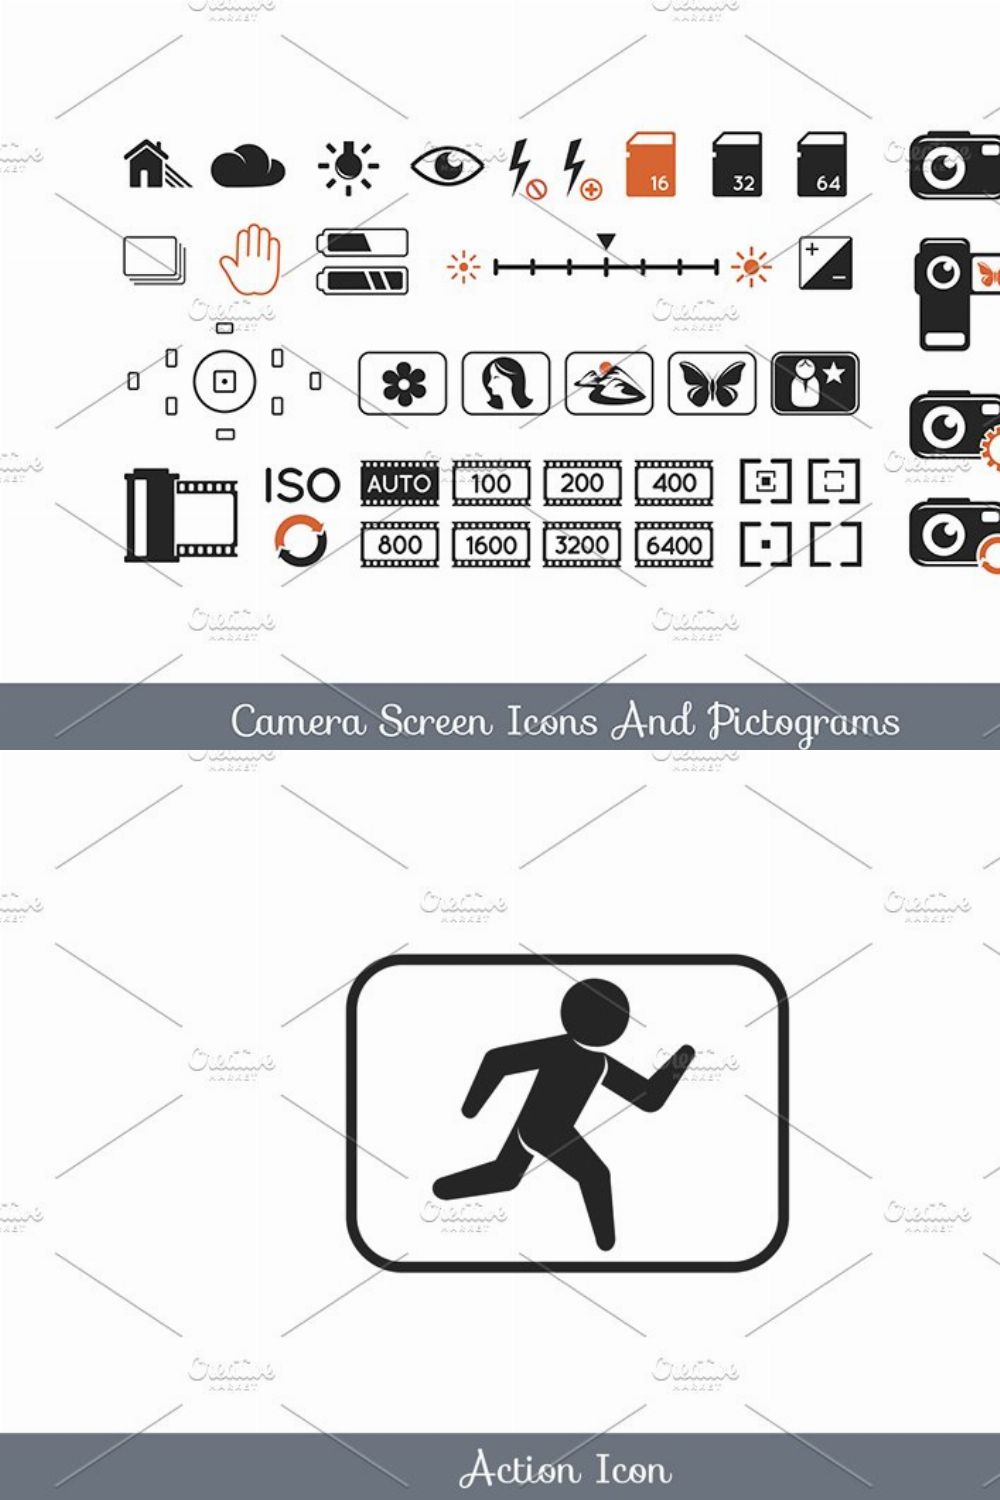 Camera screen icons and pictograms pinterest preview image.